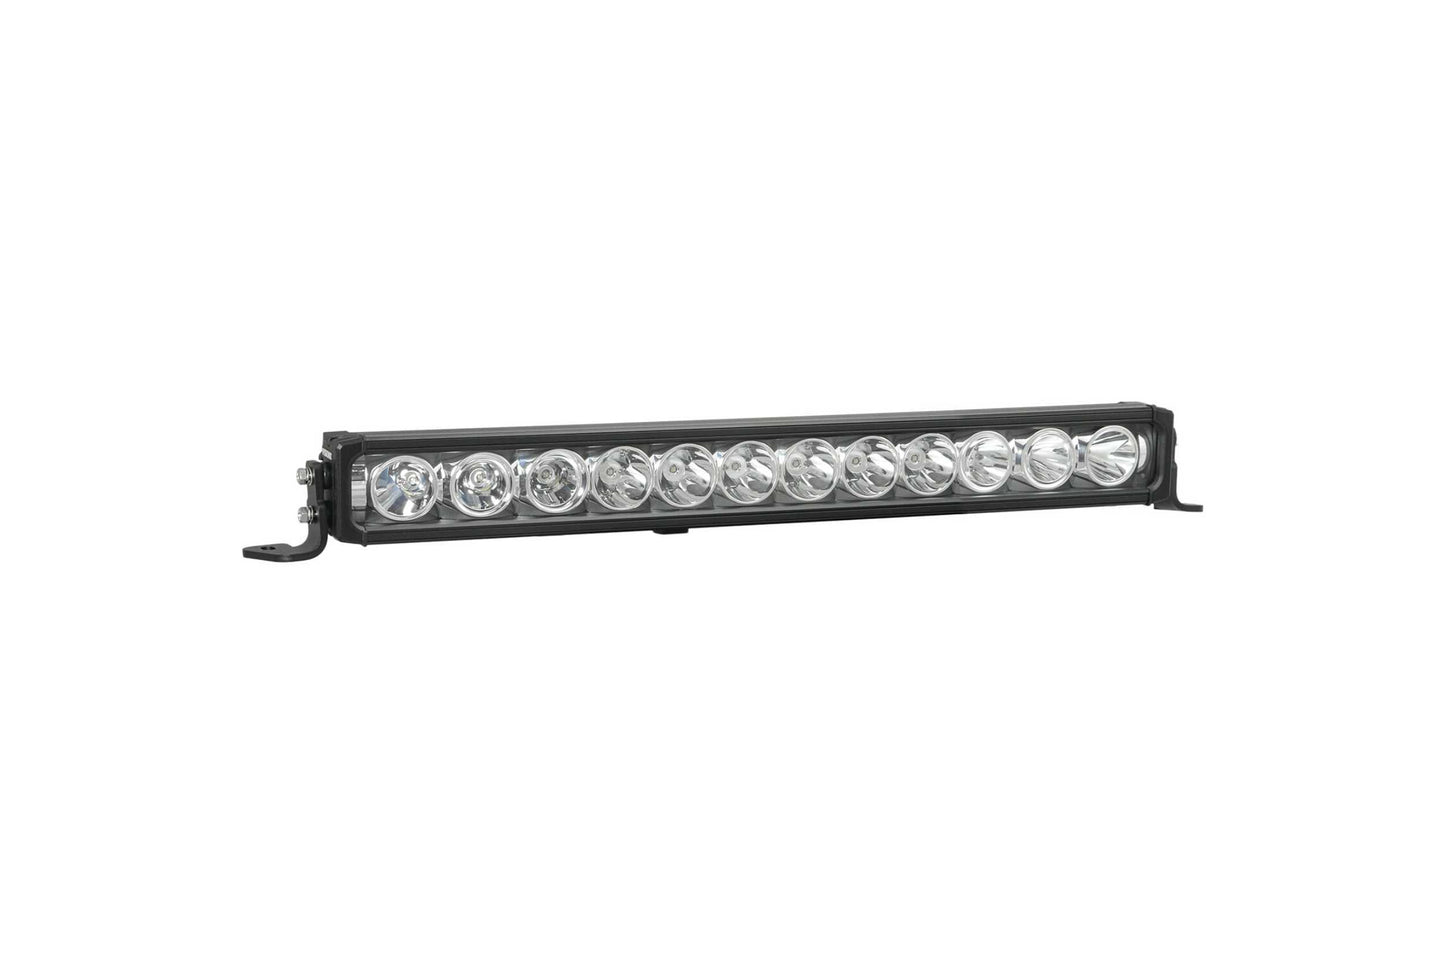 Vision X Light Bar: 25in (12-LED / XPR / Mixed Beam)